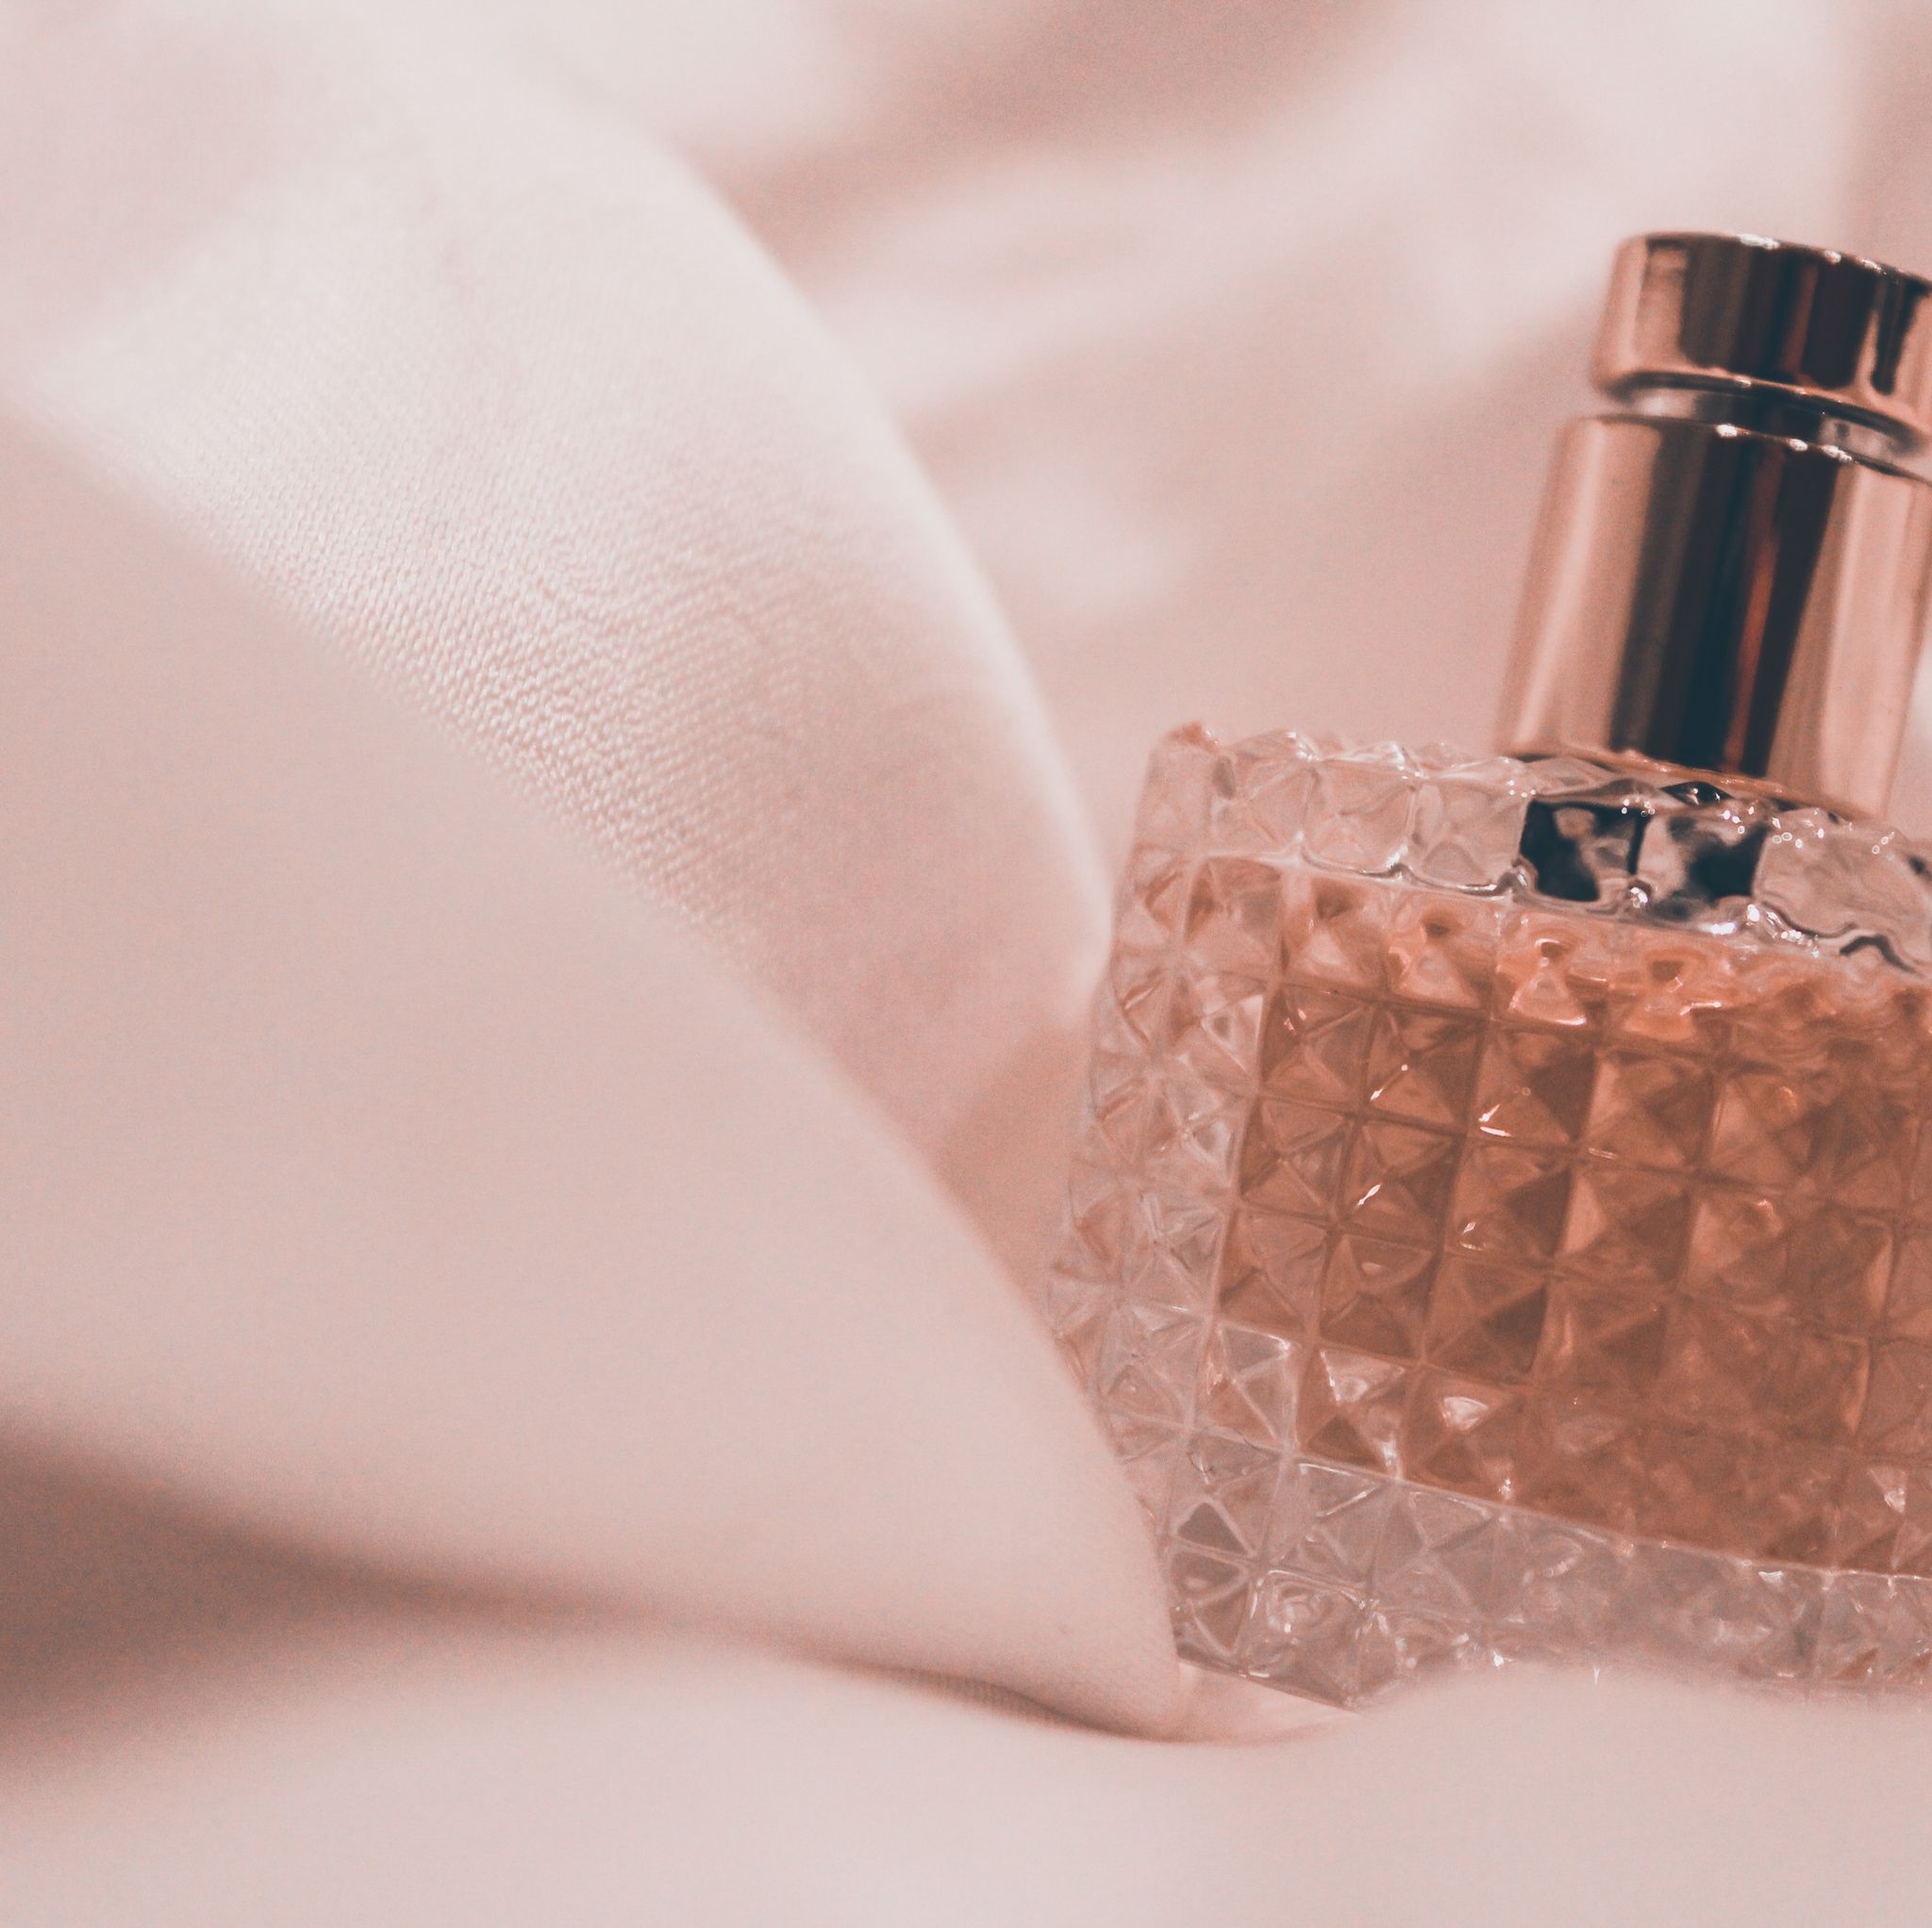 10 Rollerball Perfumes That Make You Smell Irresistible